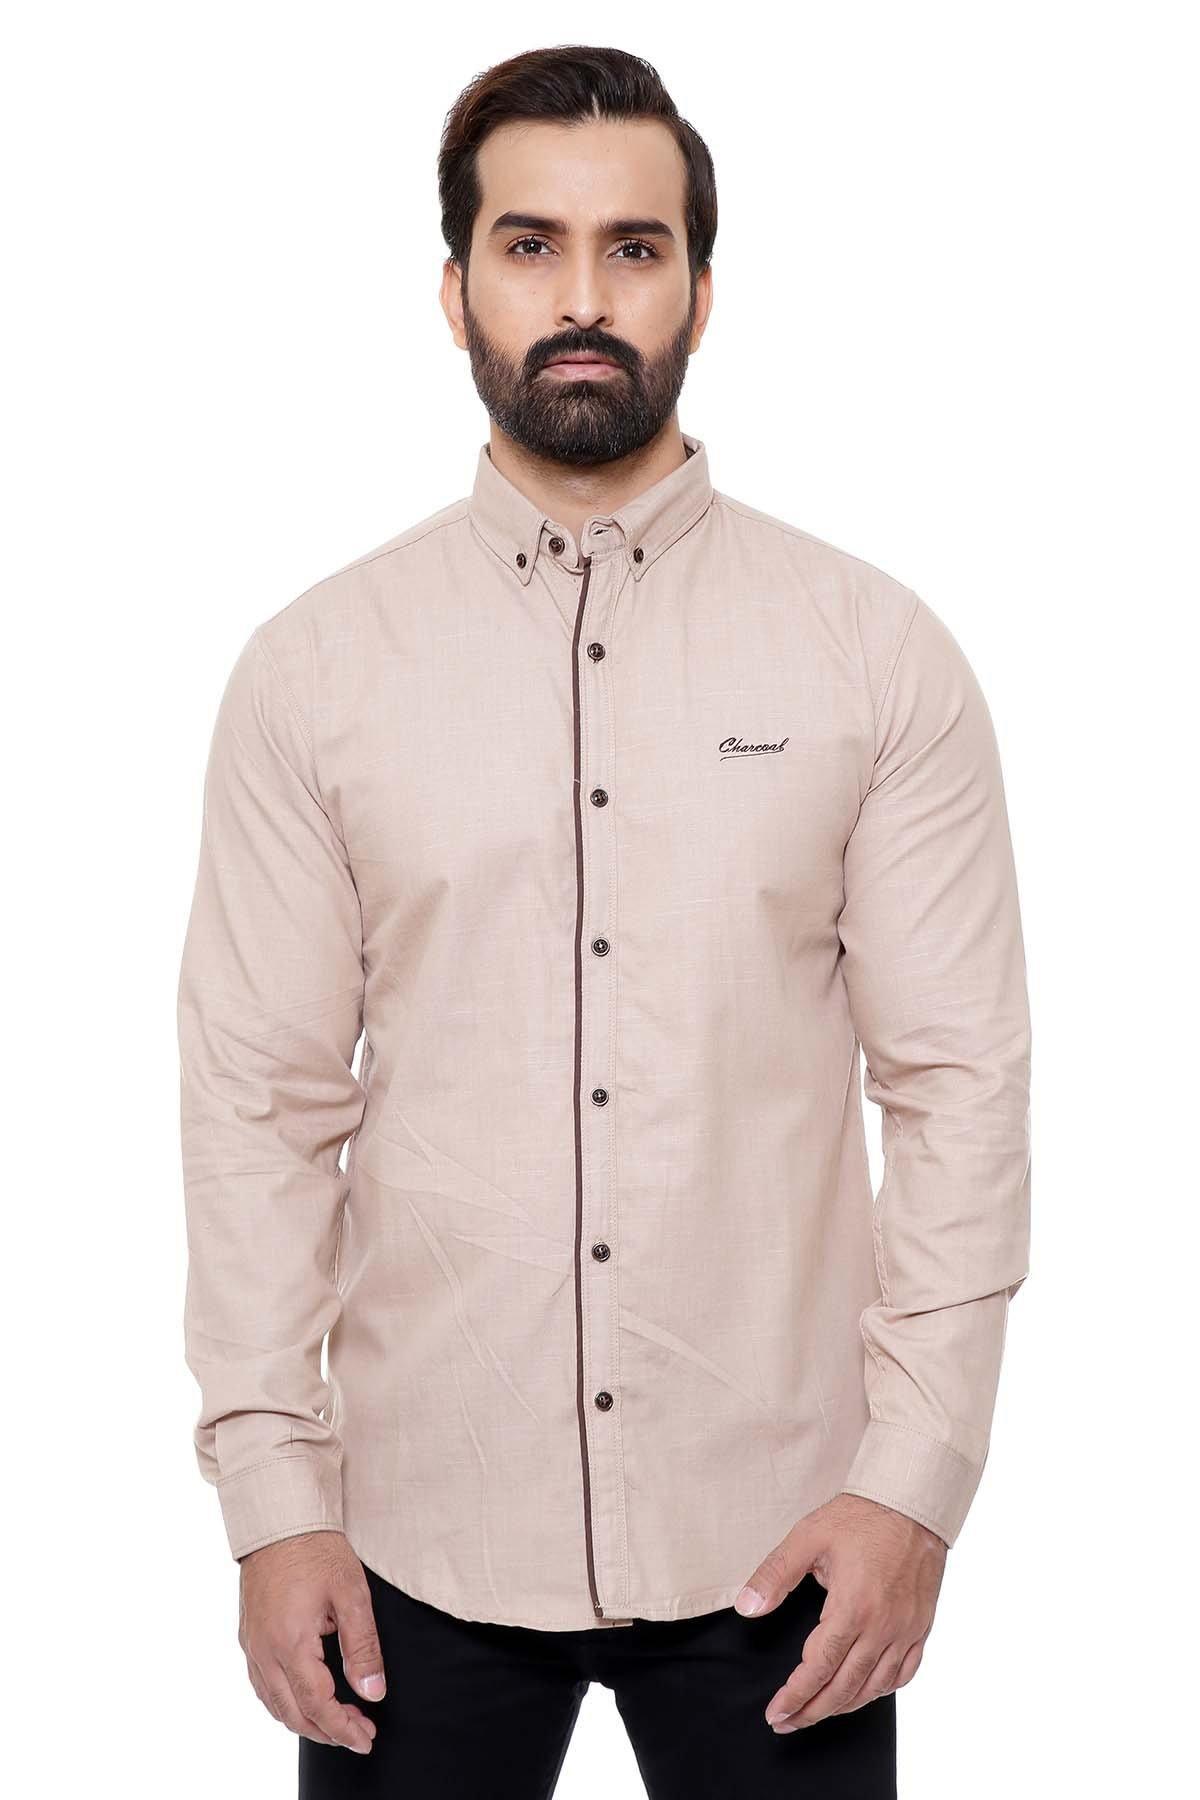 CASUAL SHIRT FULL SLEEVE SLIM FIT LIGHT BROWN at Charcoal Clothing